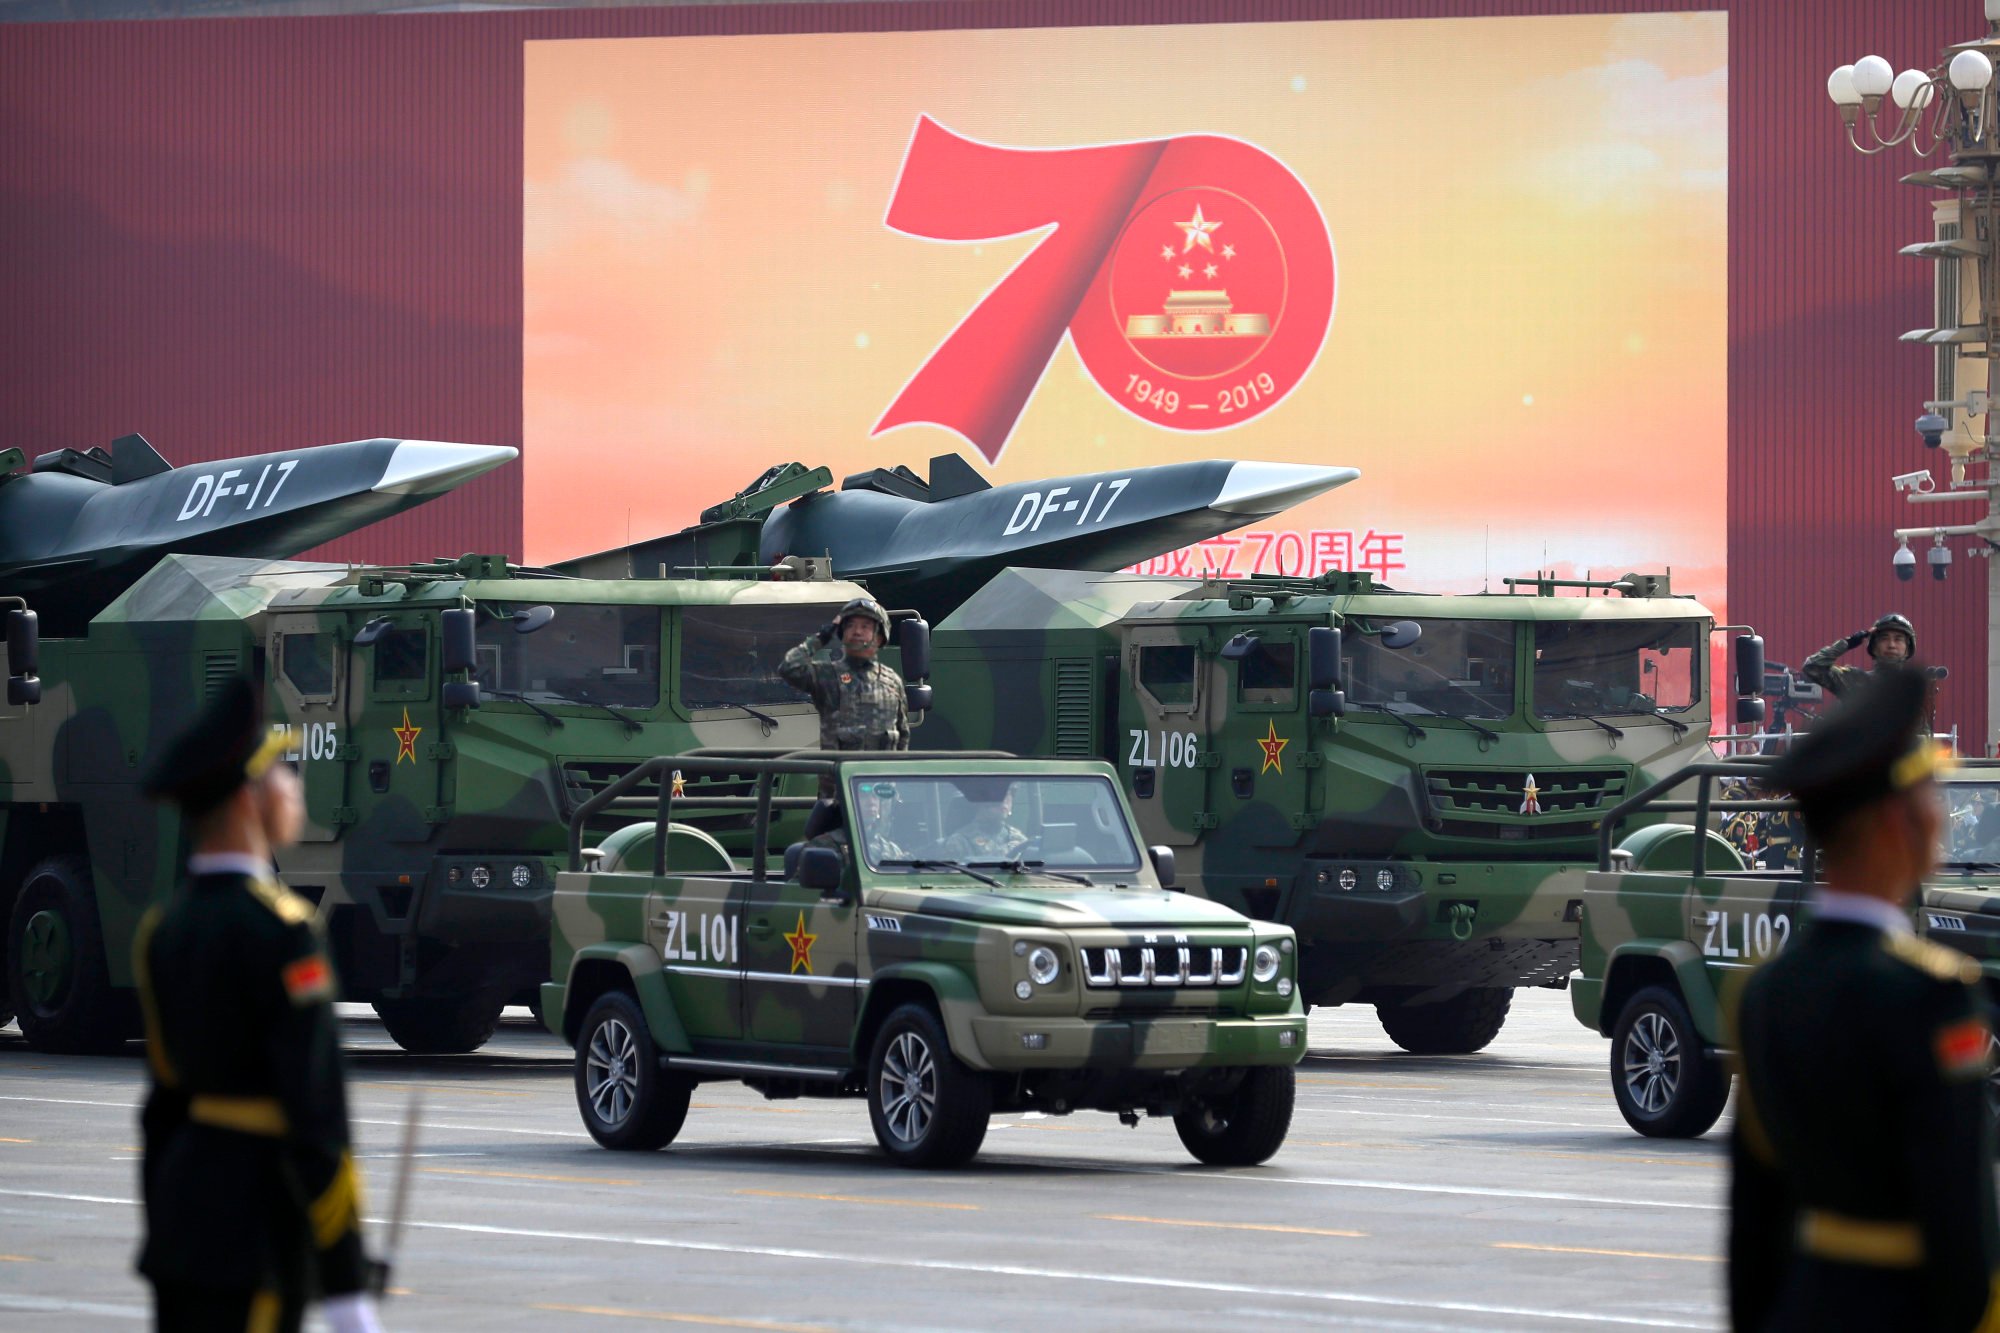 Chinese military vehicles carrying DF-17 ballistic missiles are seen at a parade to commemorate the 70th anniversary of the founding of Communist China, in Beijing on October 1, 2019. Trucks carrying weapons, including a nuclear-armed missile designed to evade US defences, were part of the parade which showcased China’s global ambitions. Photo: AP